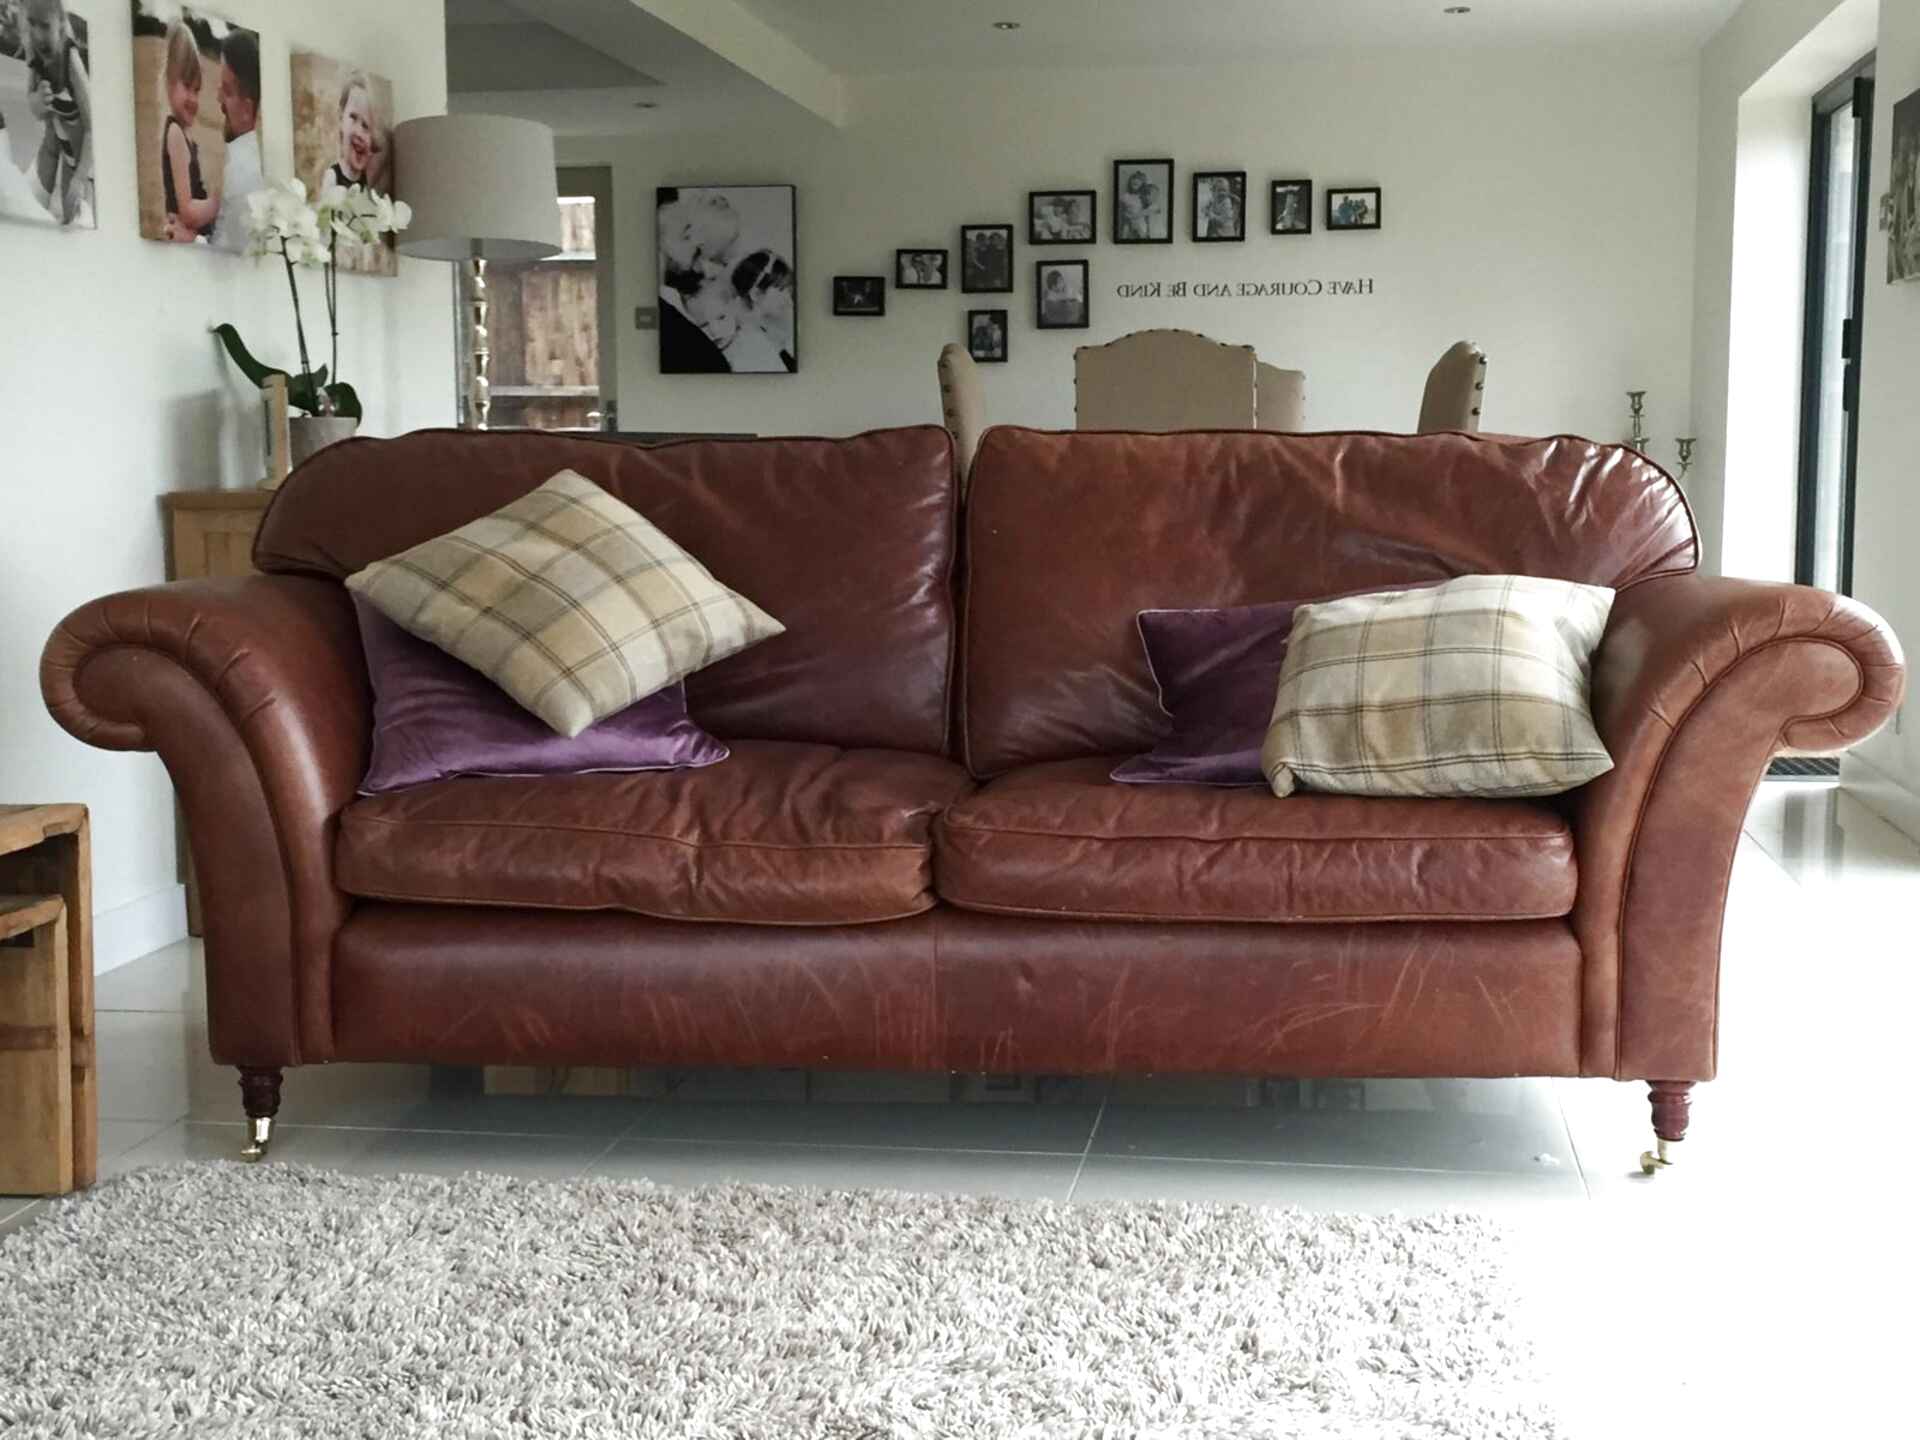 laura ashley brown leather sofa second hand